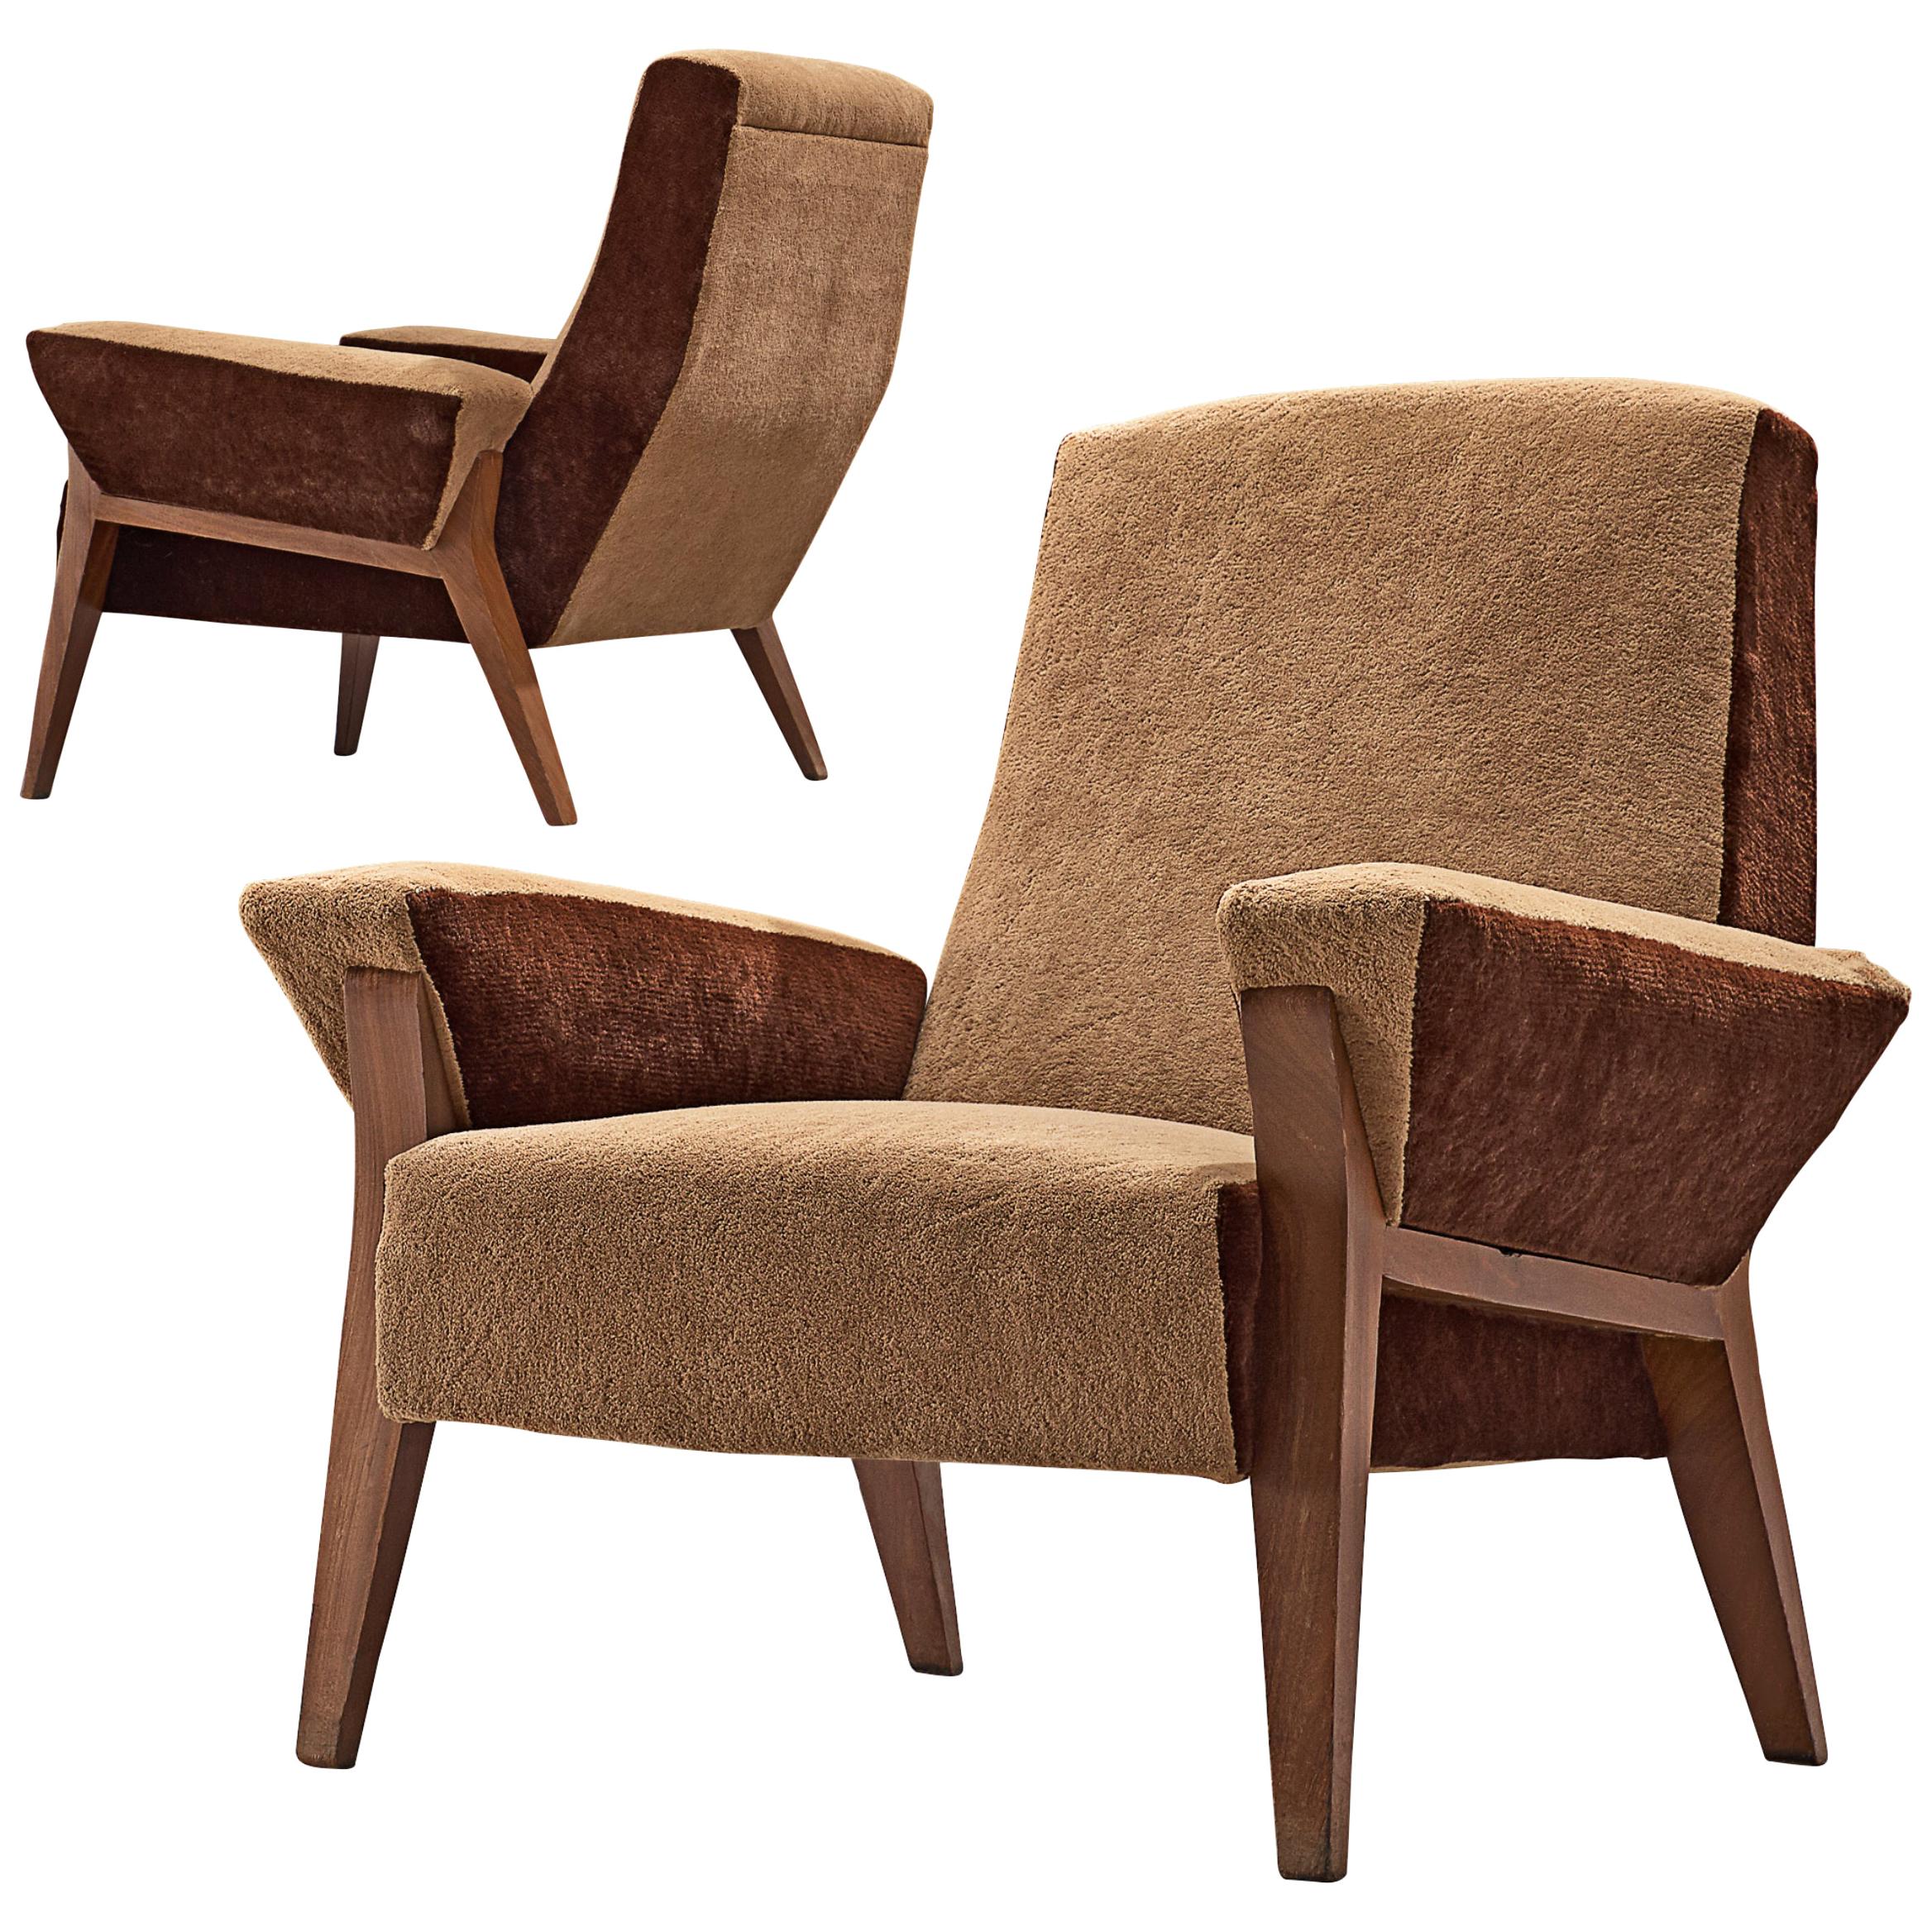 Italian Pair of Lounge Chairs with a High Back